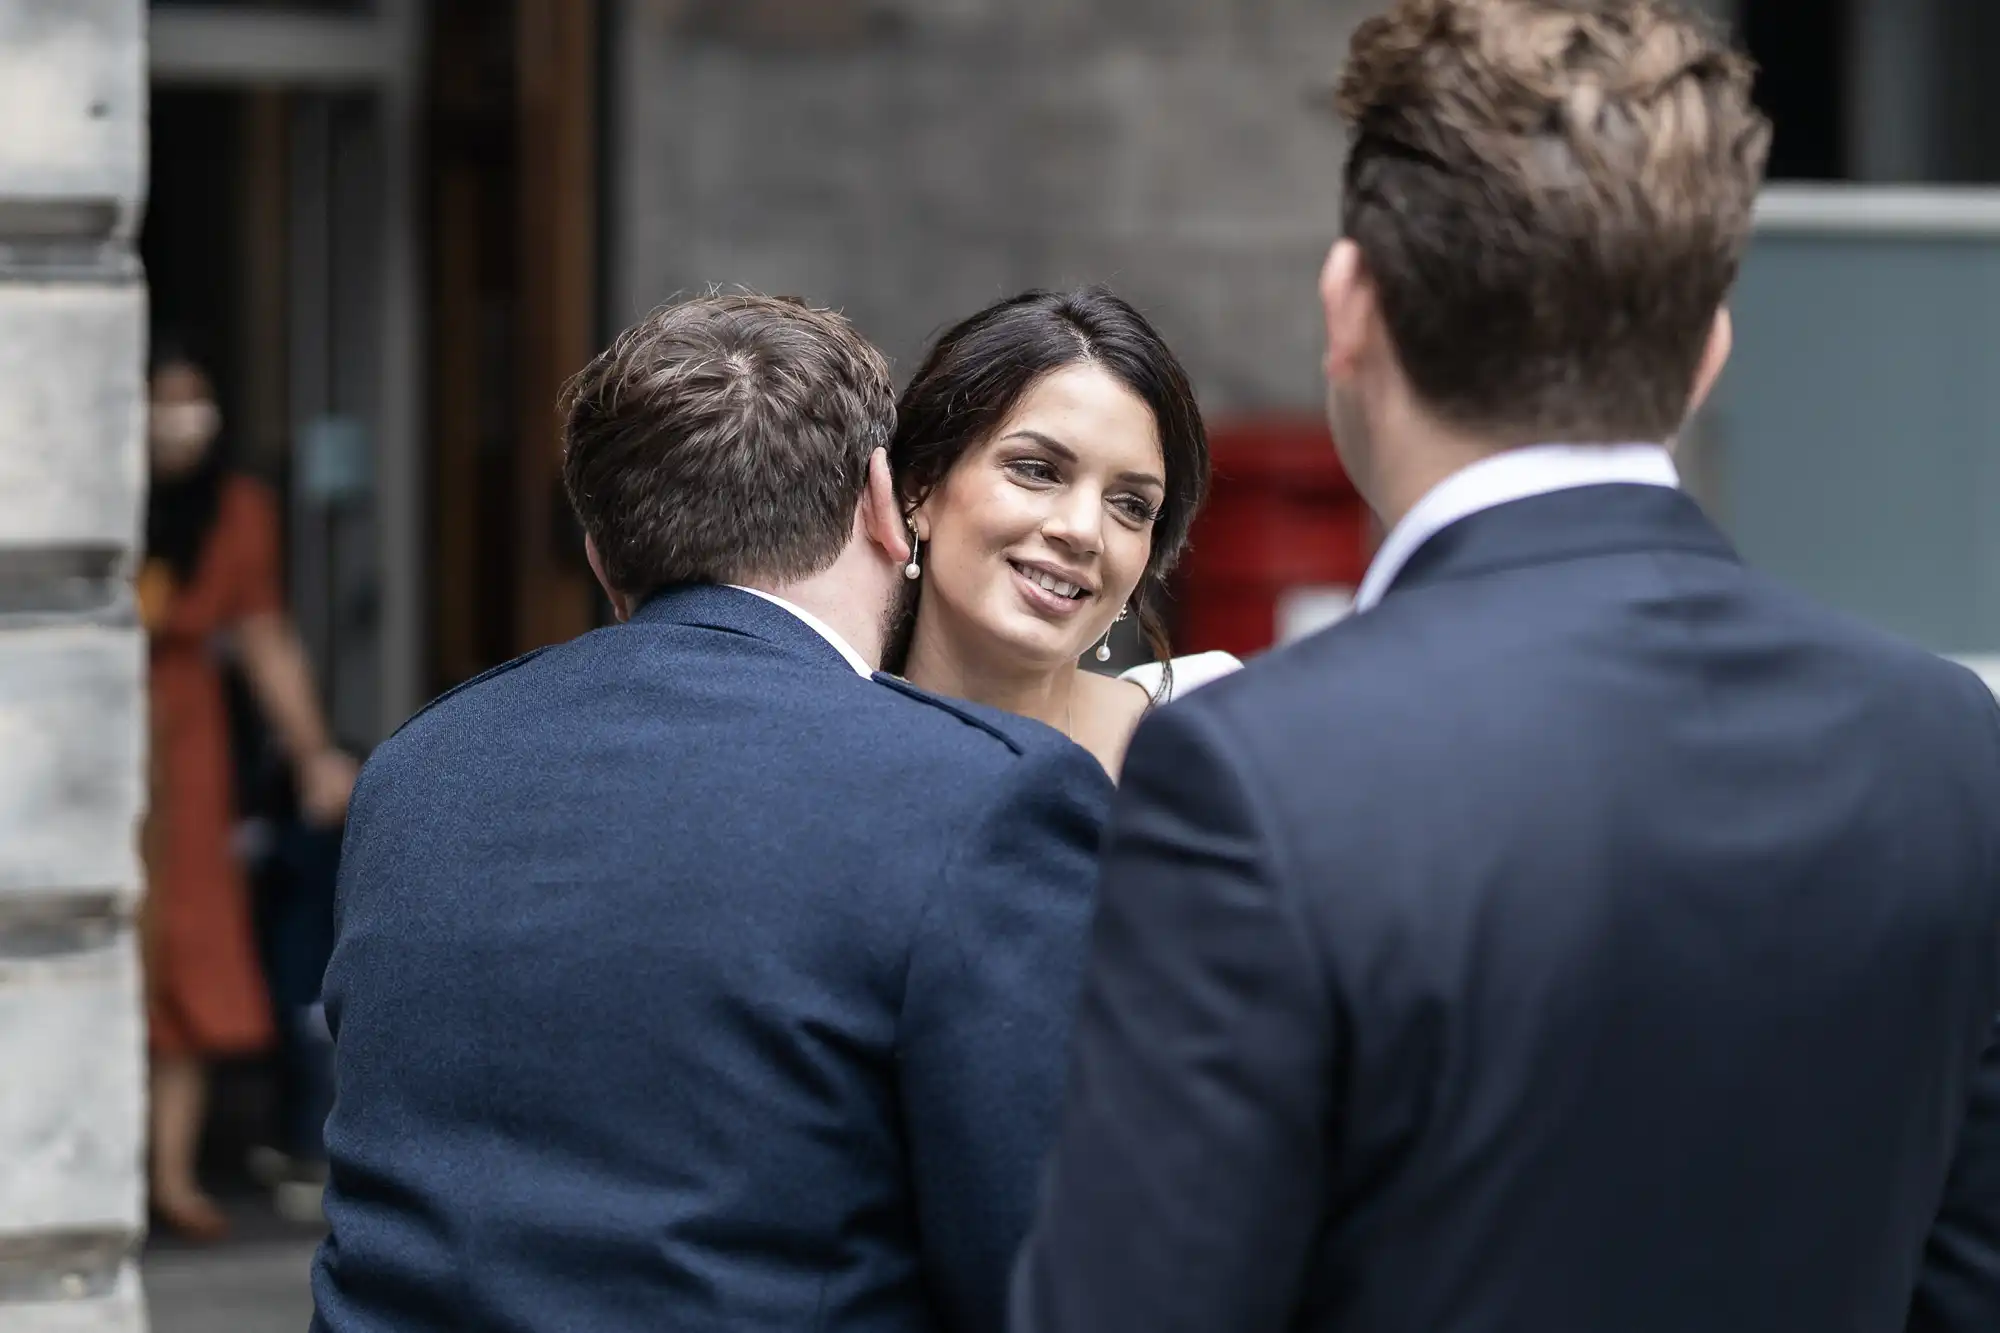 A woman smiles while conversing with two men in suits at an outdoor gathering.